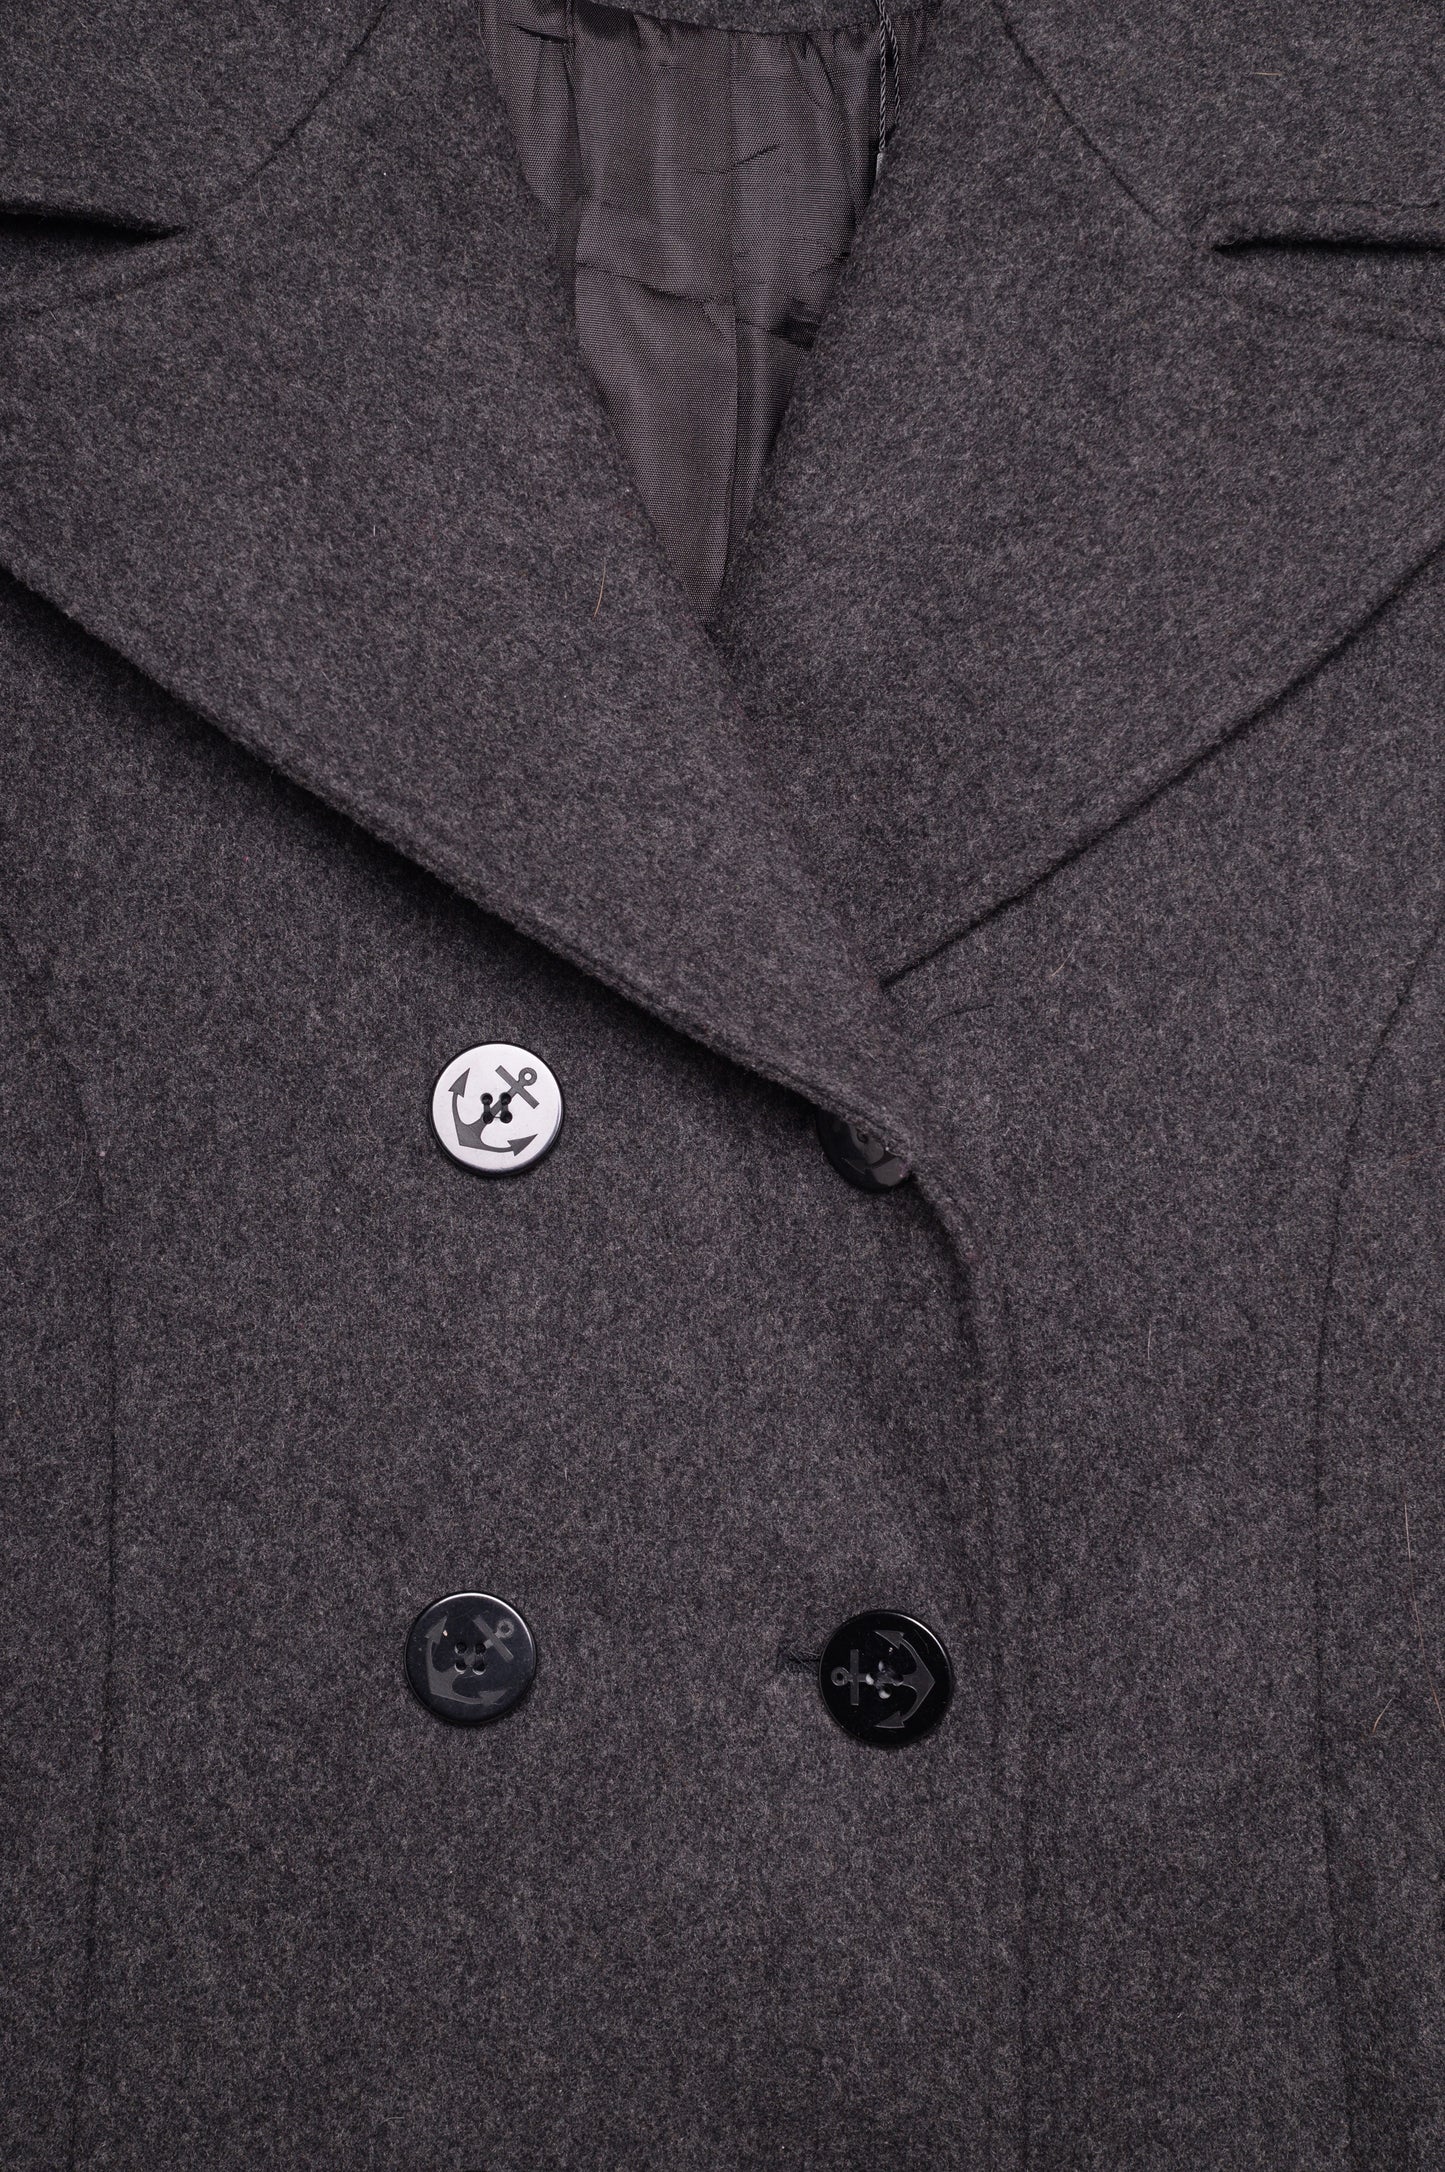 Charcoal Double Breasted Wool Coat